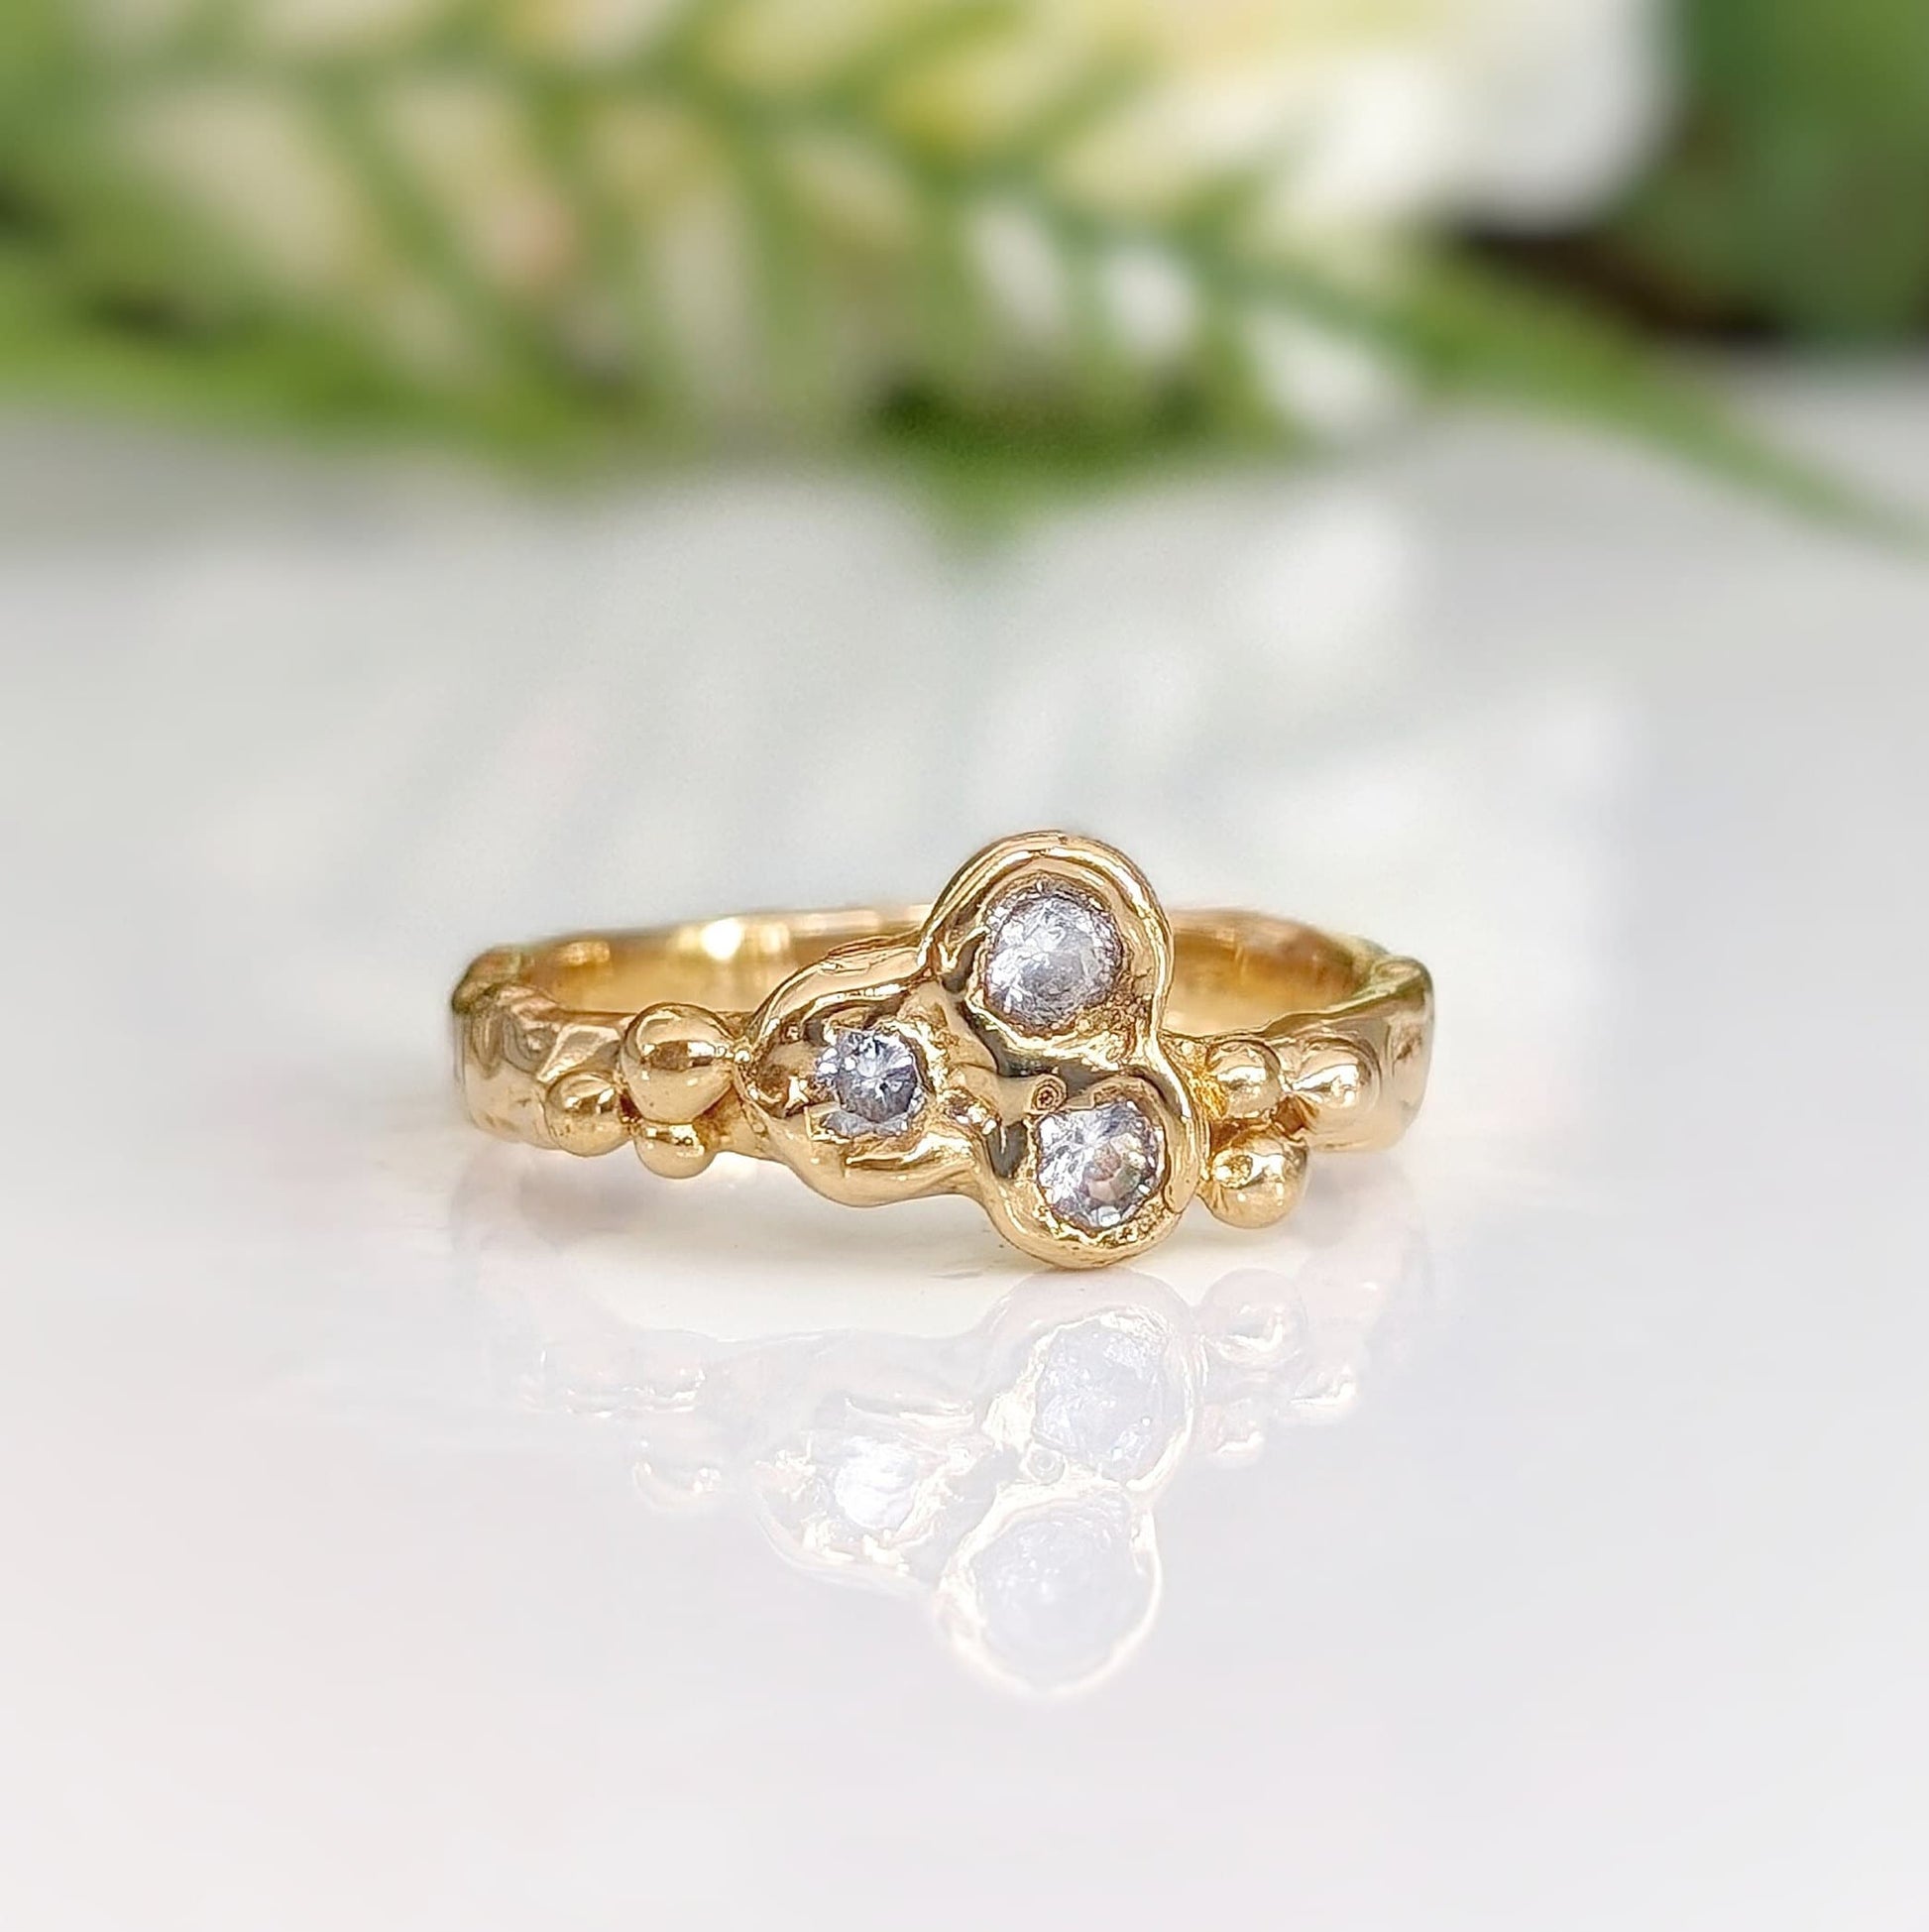 Cluster of 3 Cubic Zirconias set on a Molten Gold textured band